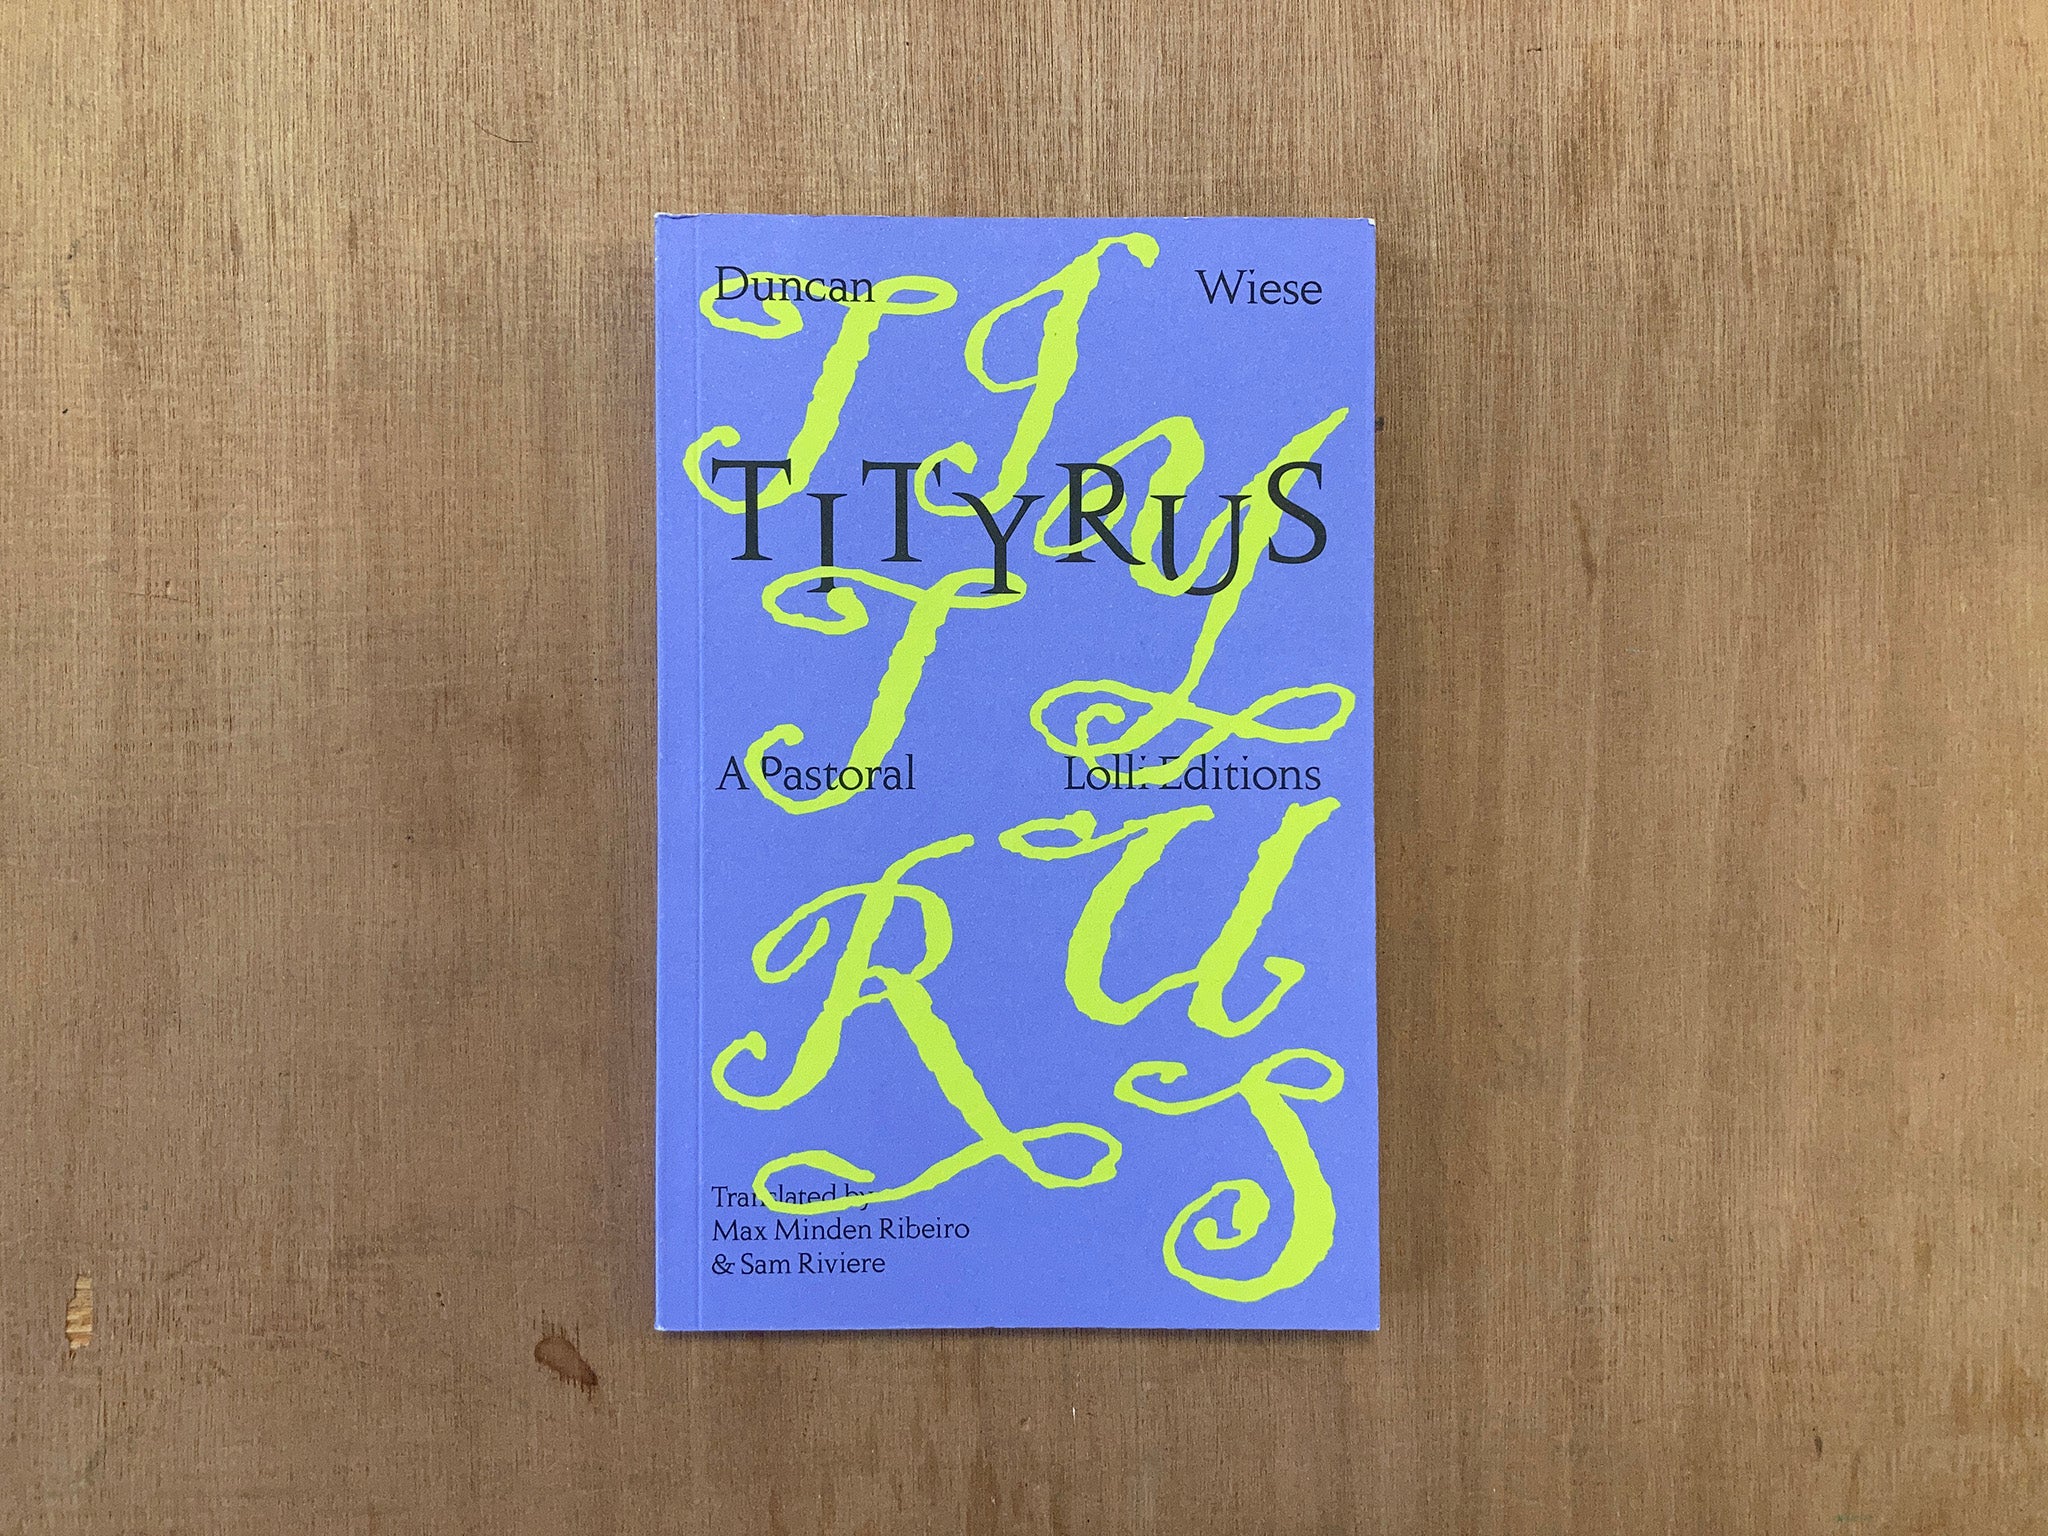 TITYRUS by Duncan Wiese